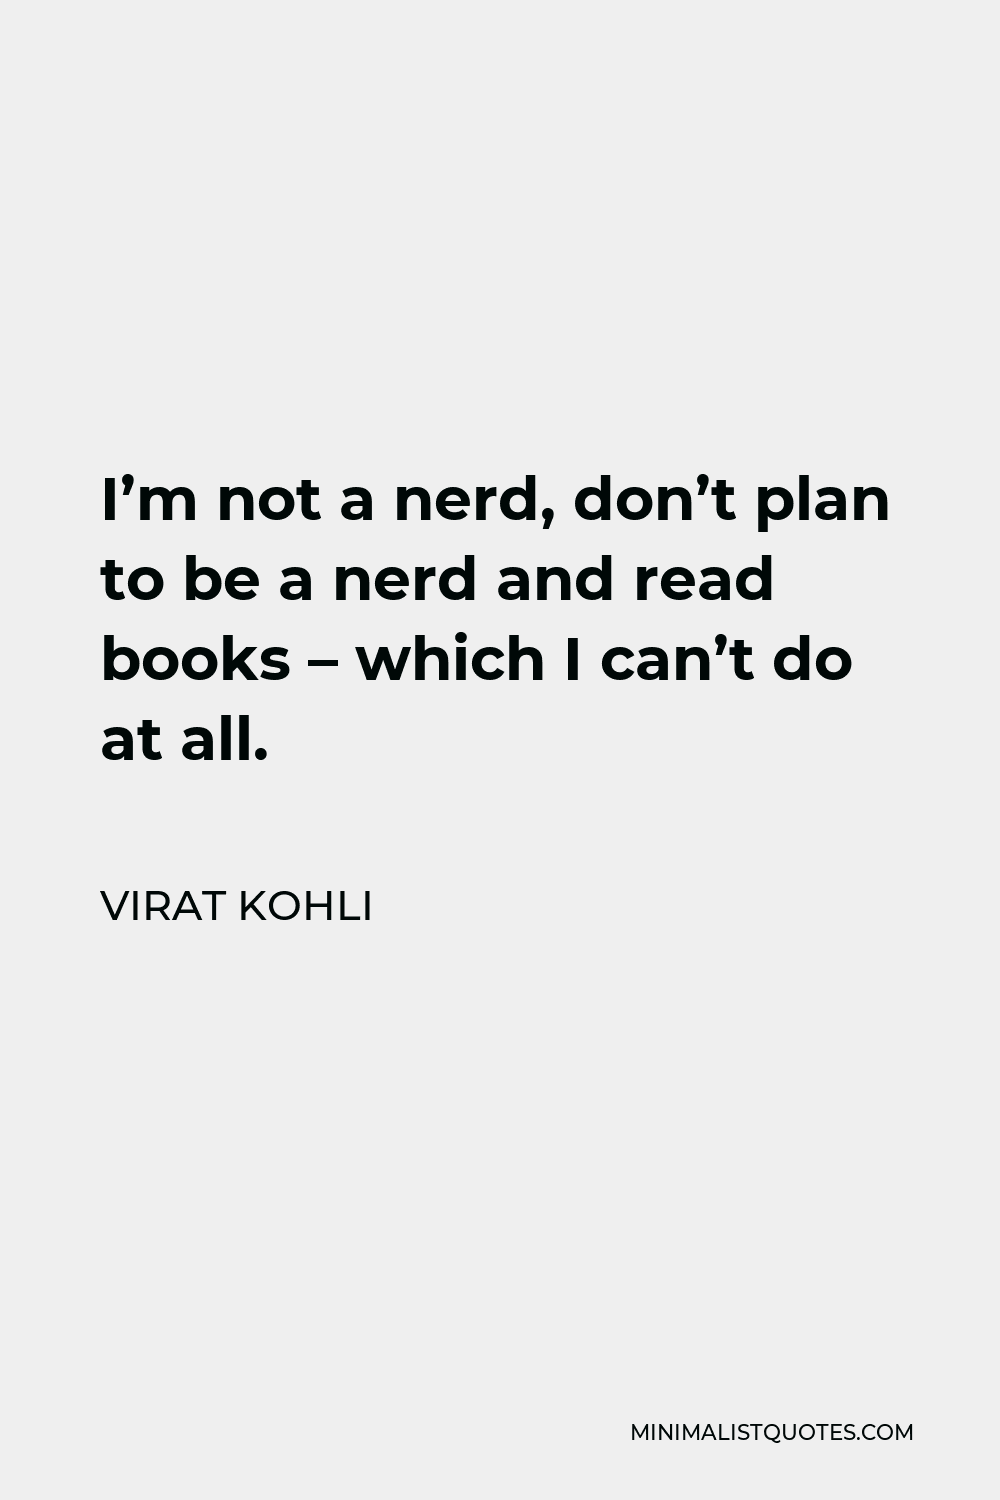 Virat Kohli Quote - I’m not a nerd, don’t plan to be a nerd and read books – which I can’t do at all.